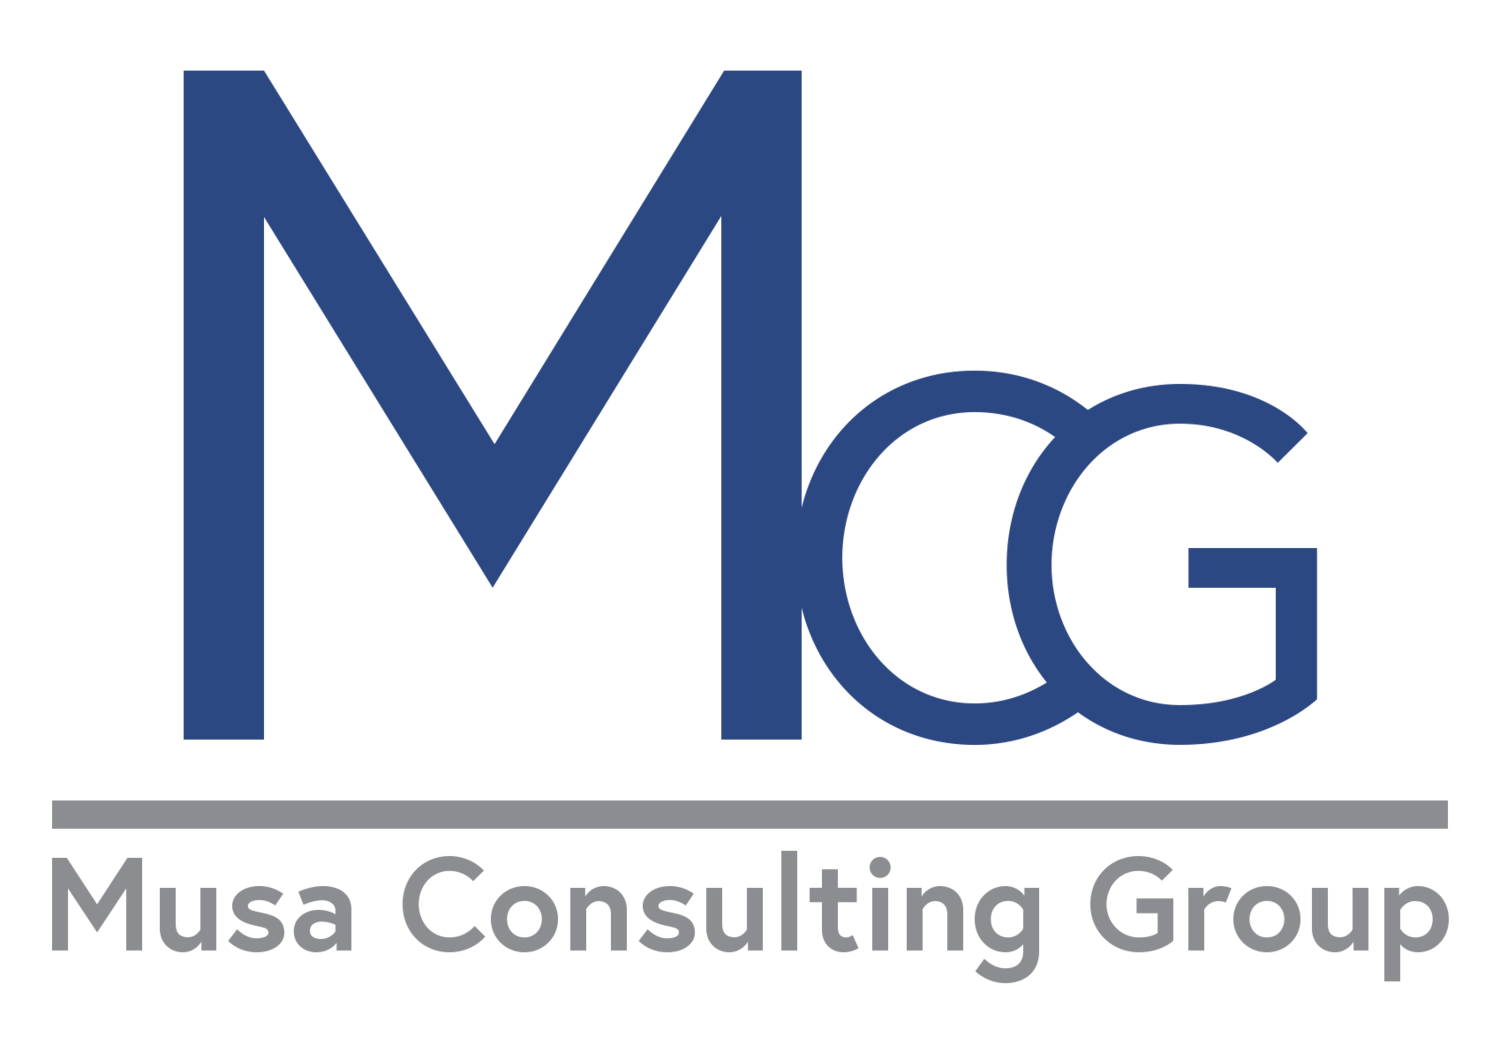 Musa Consulting Group